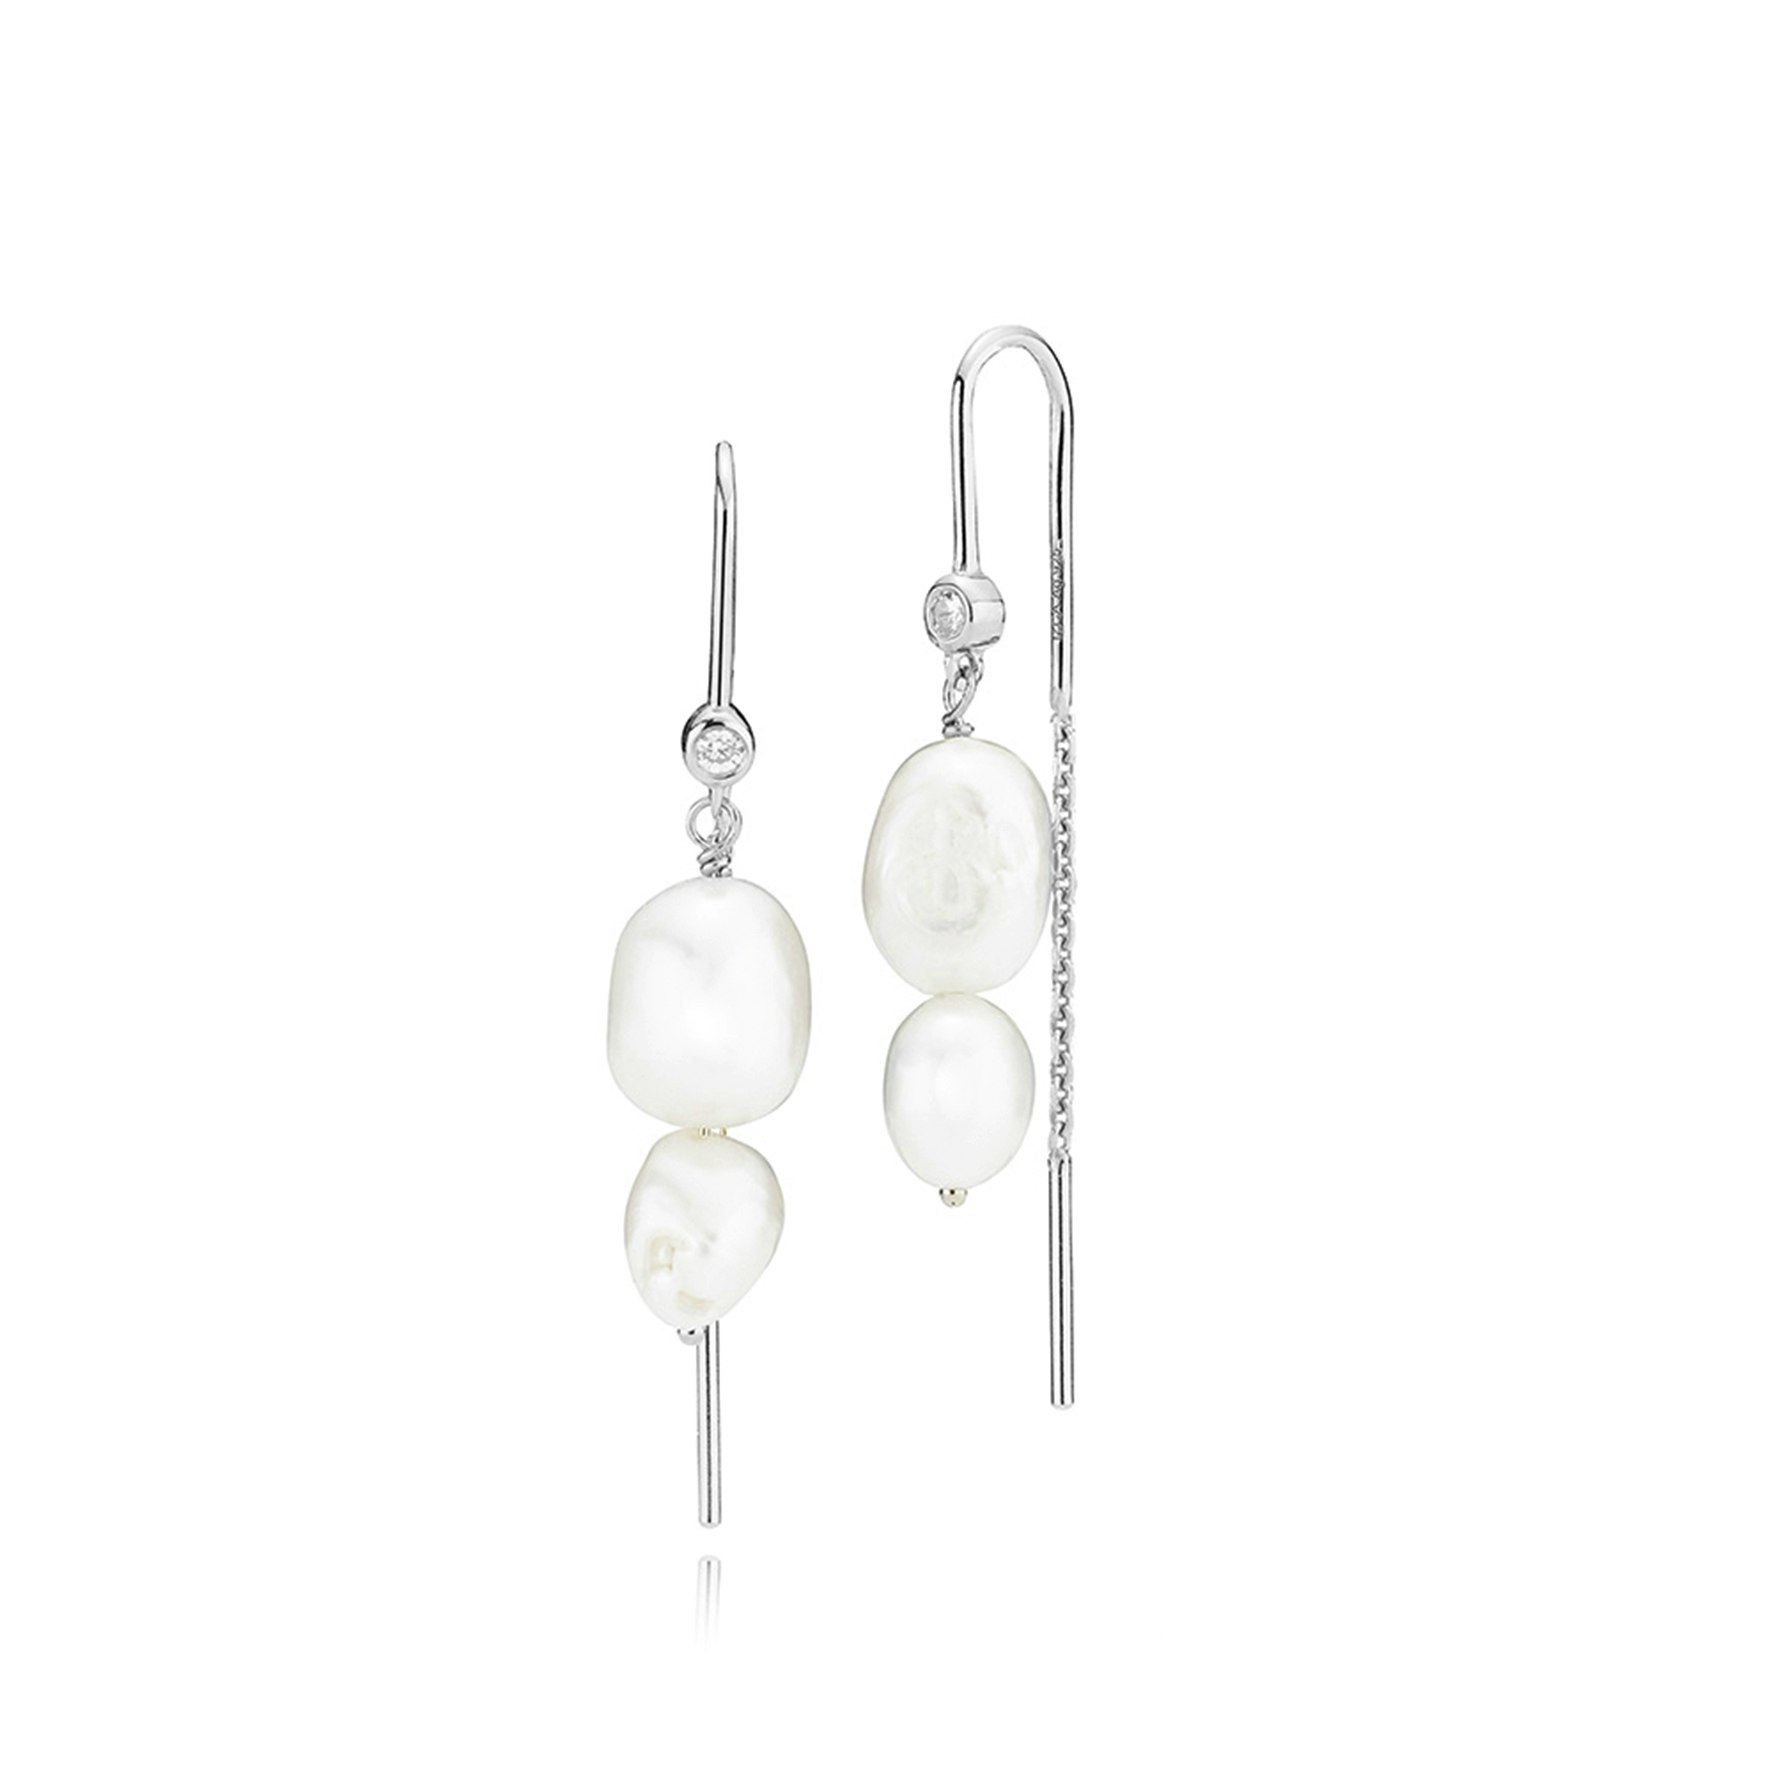 Leonora Earchains With Freshwater Pearls från Izabel Camille i Silver Sterling 925